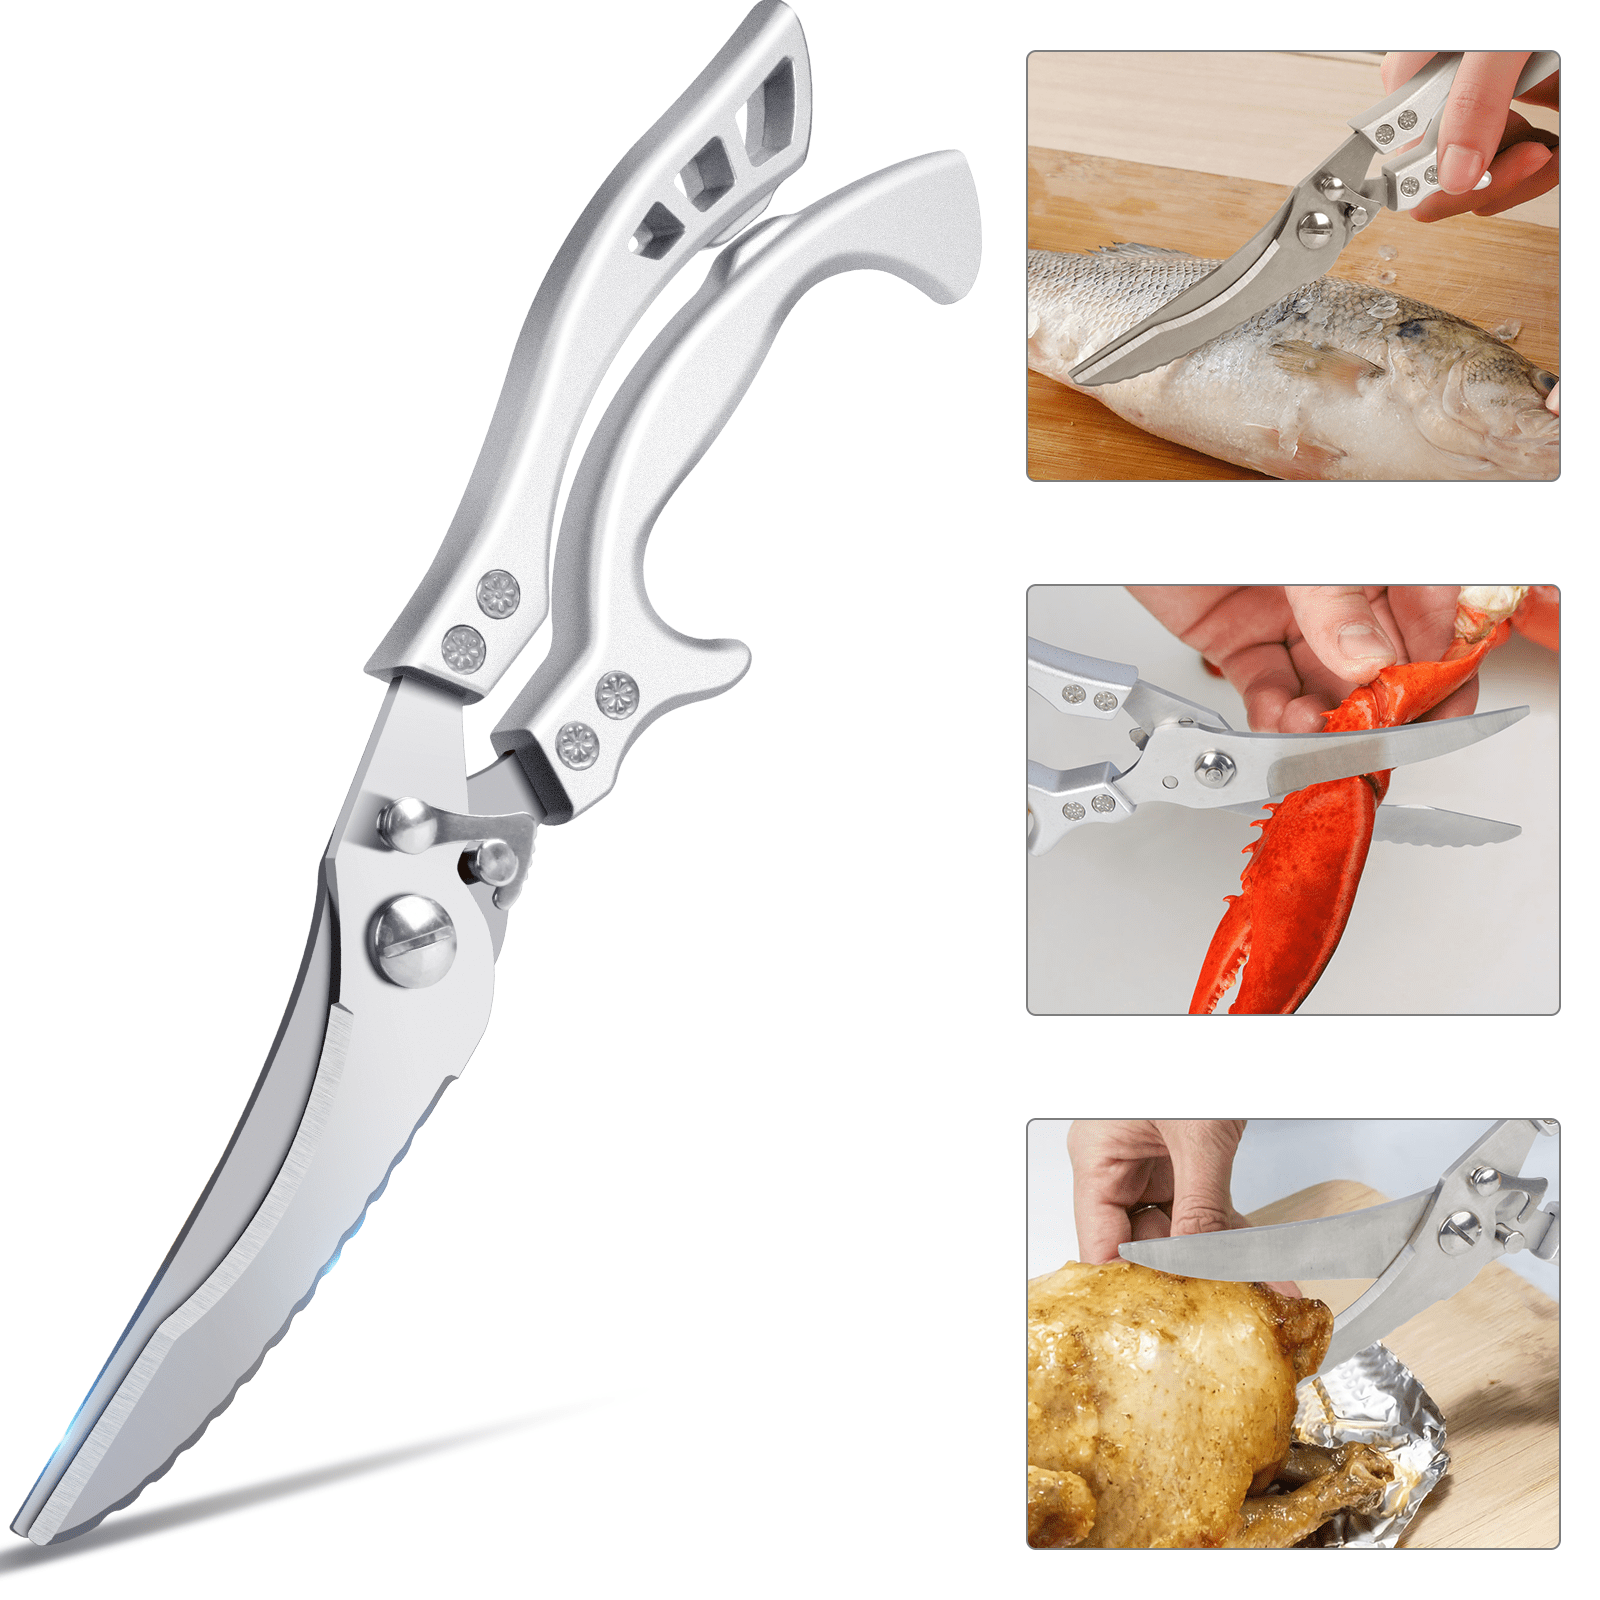 KooKTooL Poultry Shears Heavy Duty Kitchen Scissors with Safety Lock and  Hang Hole Kitchen Shears with Anti-Slip Handle for Cutting